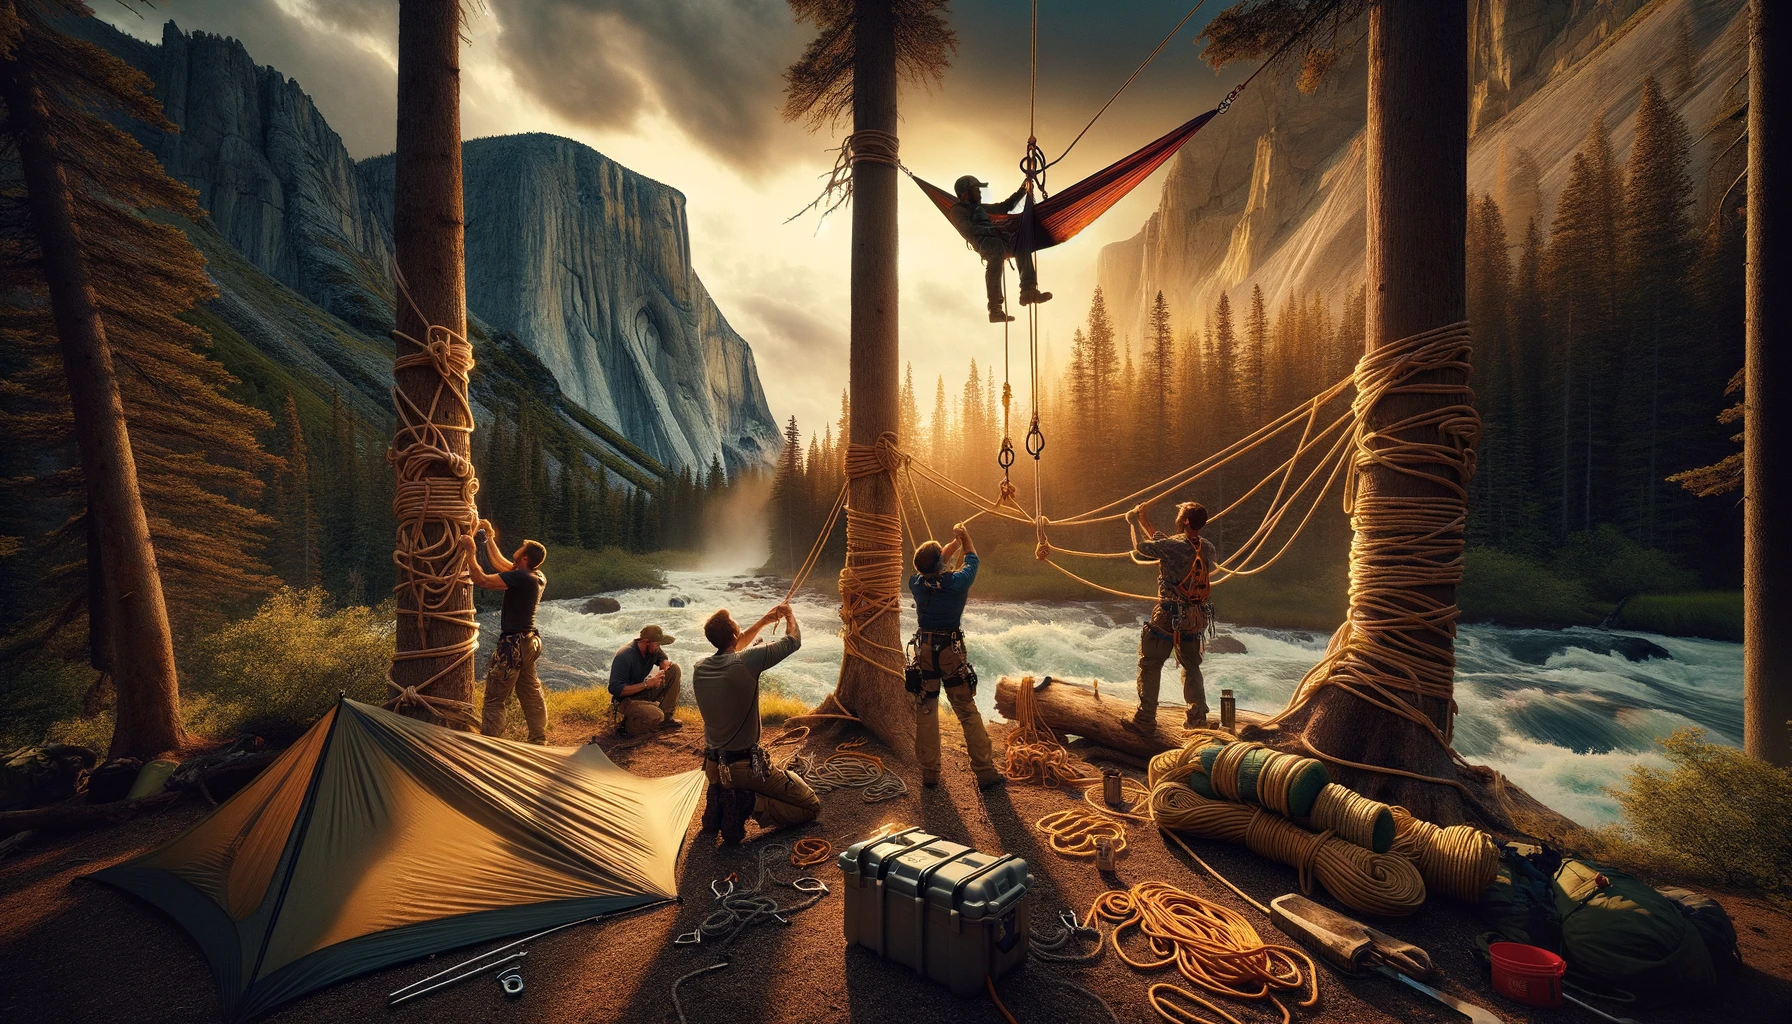 Preppers using various rope knots to set up camp in wilderness with hammock, extended tarp, and climbing gear, showcasing knot versatility against a backdrop of forests, cliffs, and river